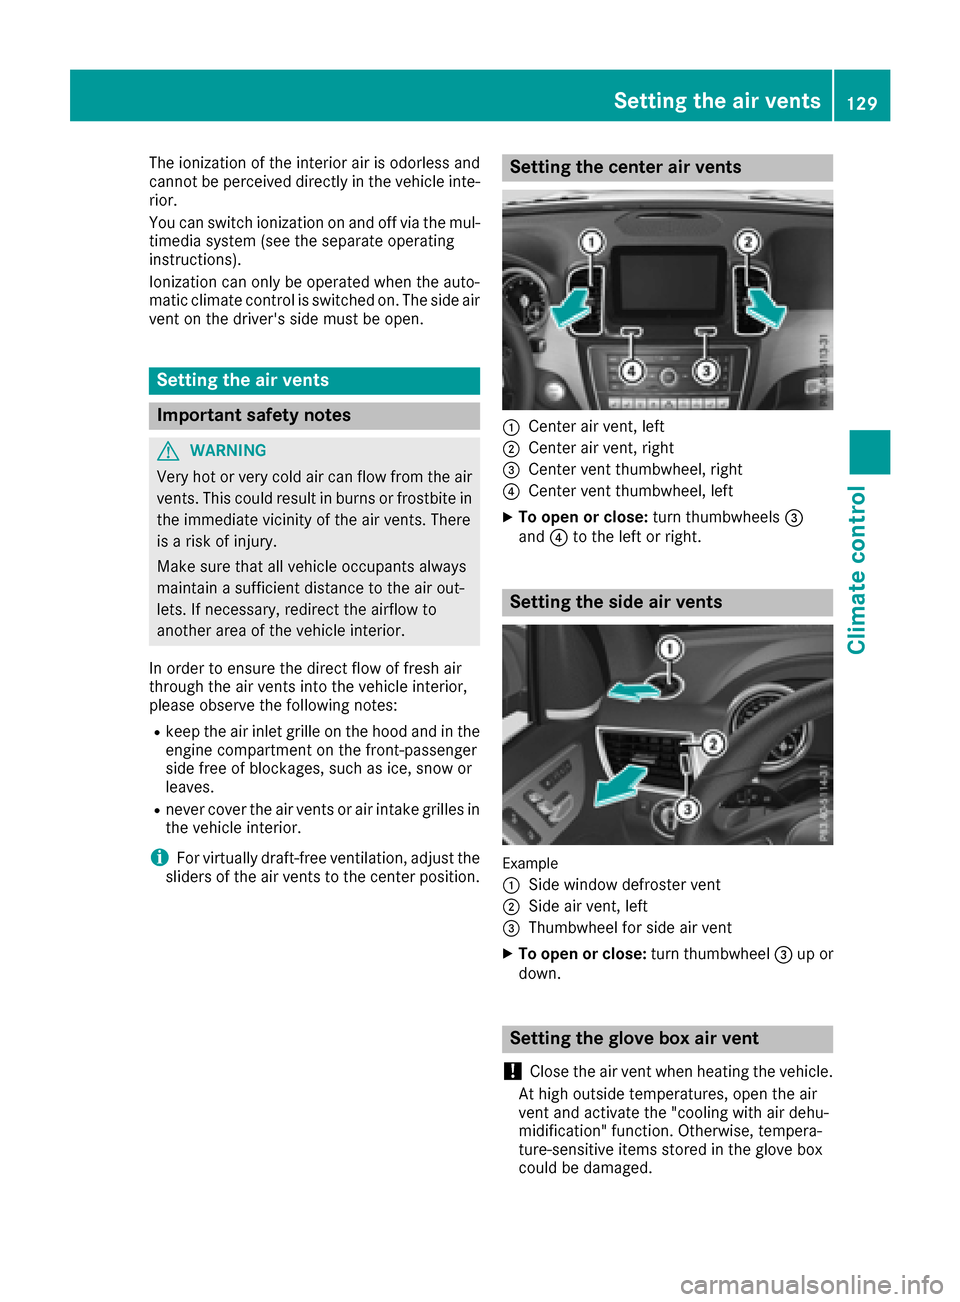 MERCEDES-BENZ GLE SUV 2017 W166 Owners Manual The ionization of the interior air is odorless and
cannot be perceived directly in the vehicle inte-
rior.
You can switch ionization on and off via the mul-
timedia system (see the separate operating
